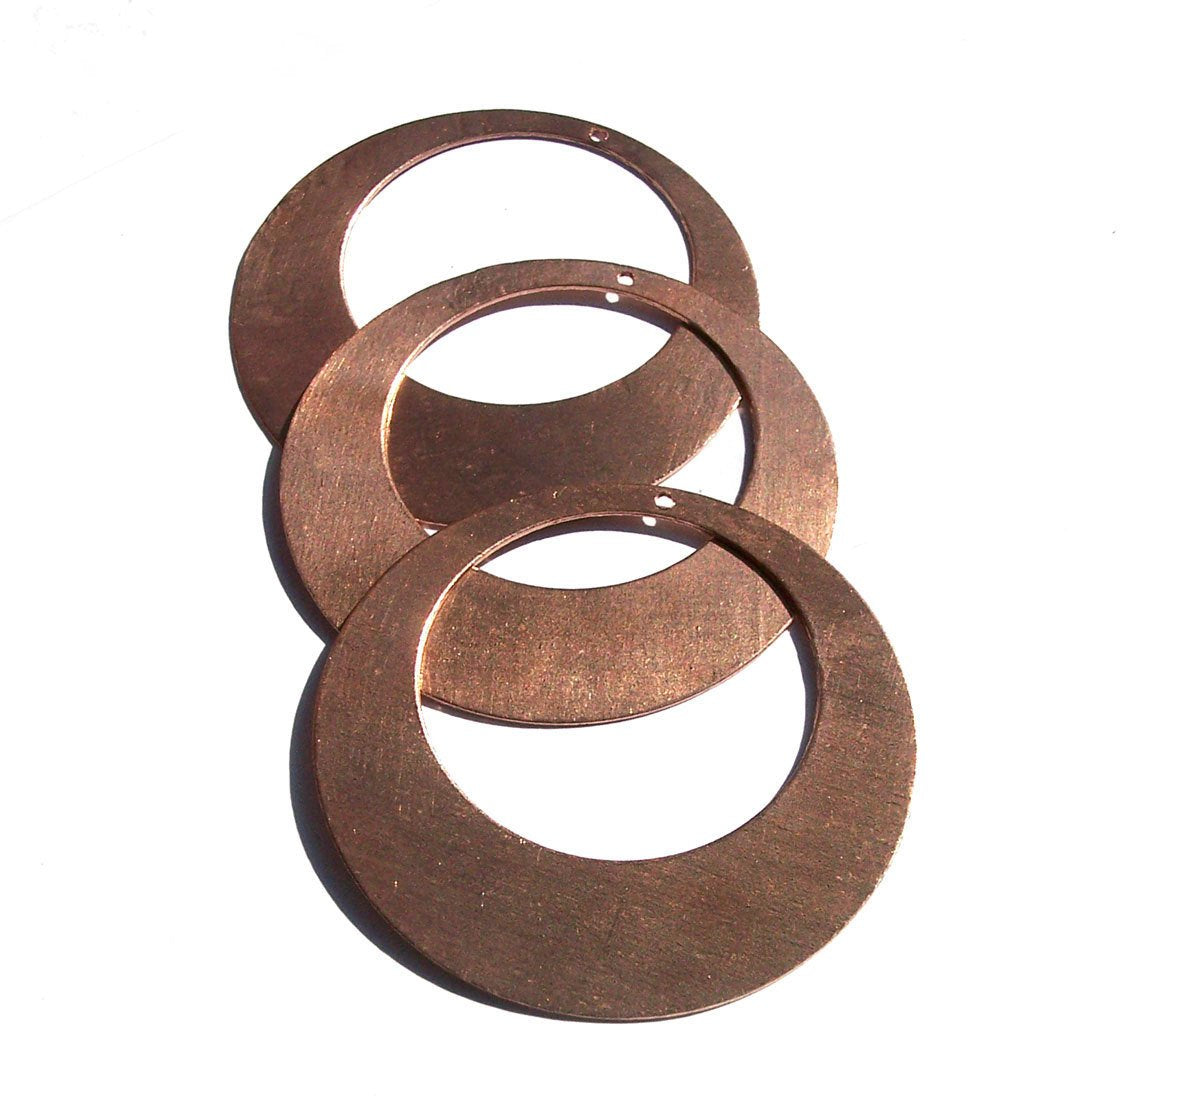 Pure Copper 45mm Blanks Hoops 20G for Earrings or Pendant Offset Circle for Enameling Stamping Texturing, Jewelry Supplies - 4 Pieces